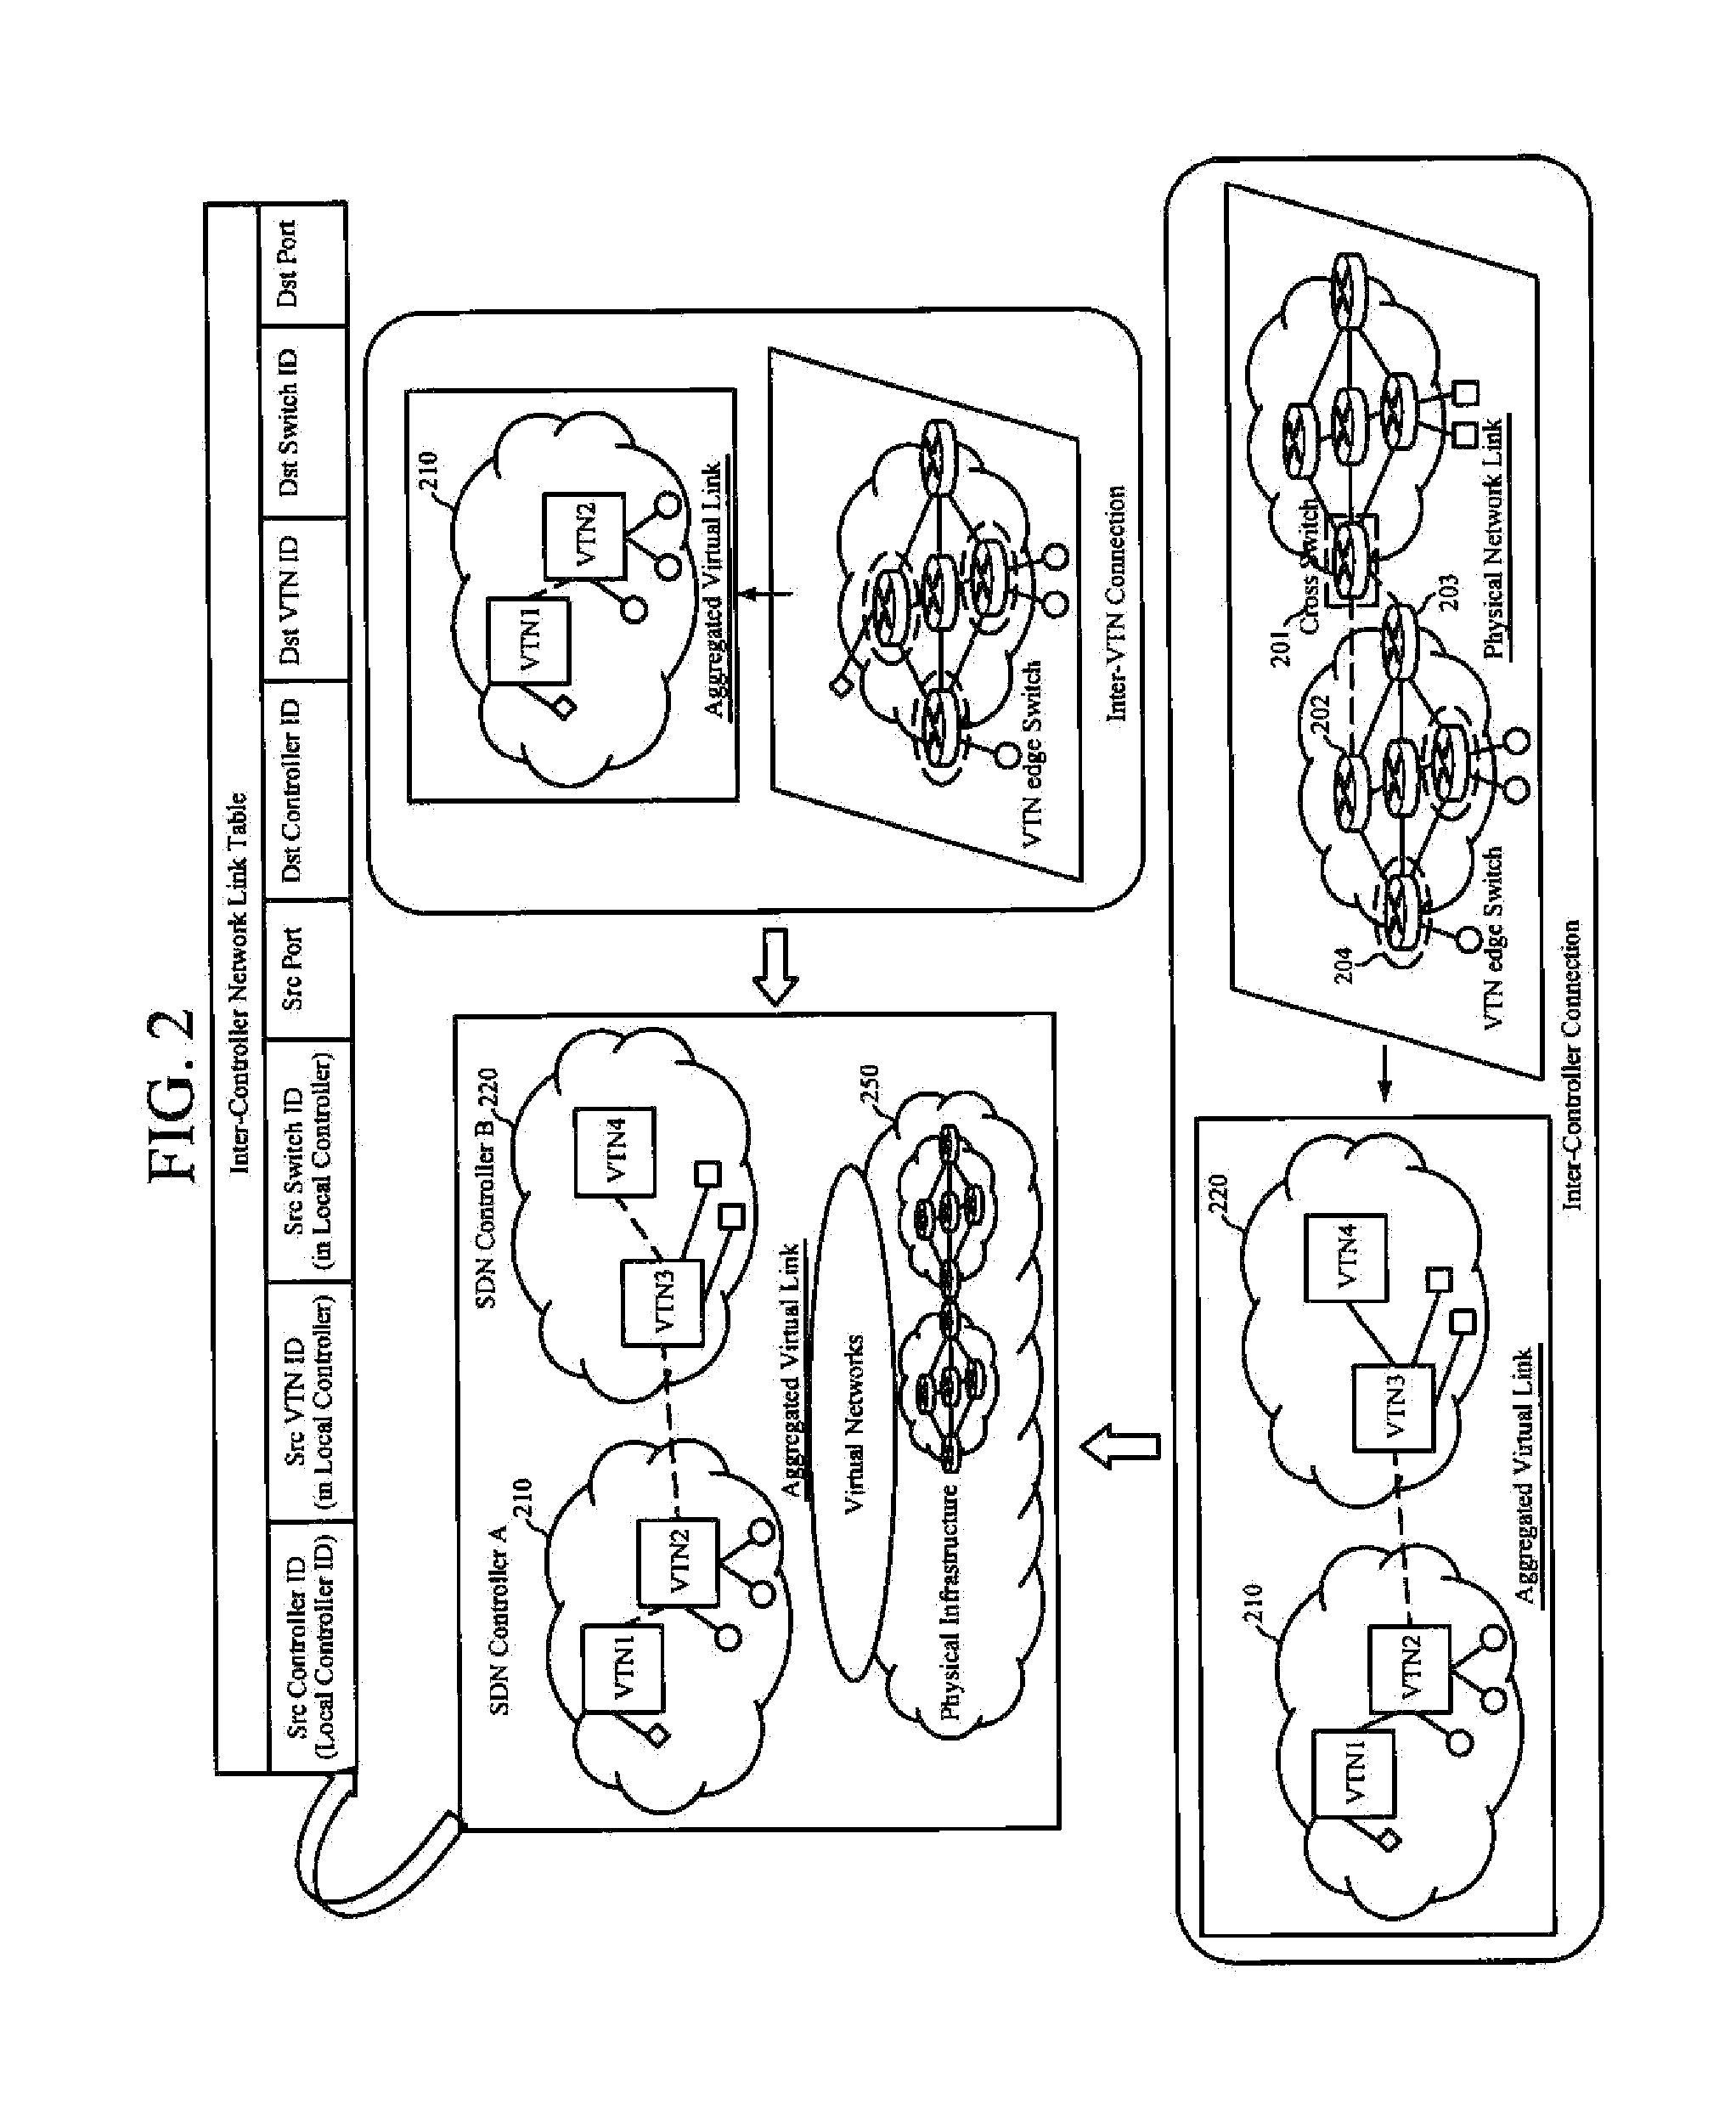 System and method for virtual network-based distributed multi-domain routing control